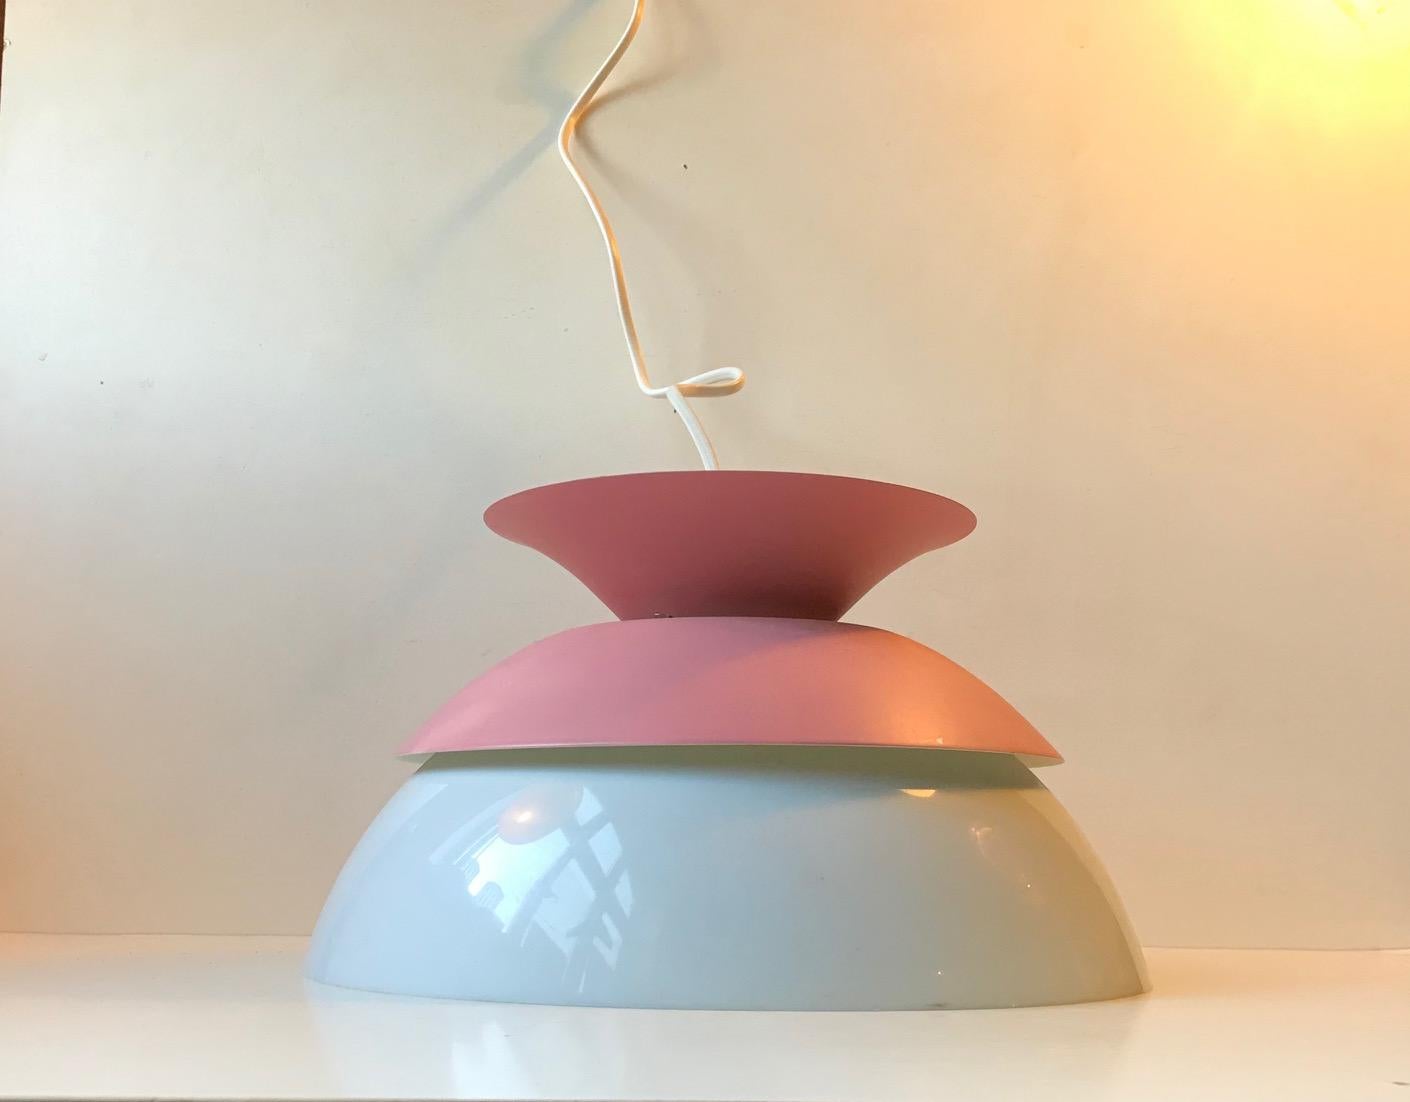 Pink powder coated aluminium ceiling light with acrylic bottom shade/diffuser. Manufactured in Denmark by Nordisk Solar Compagni the 1980s in a style celebrating Jorn Utzon.